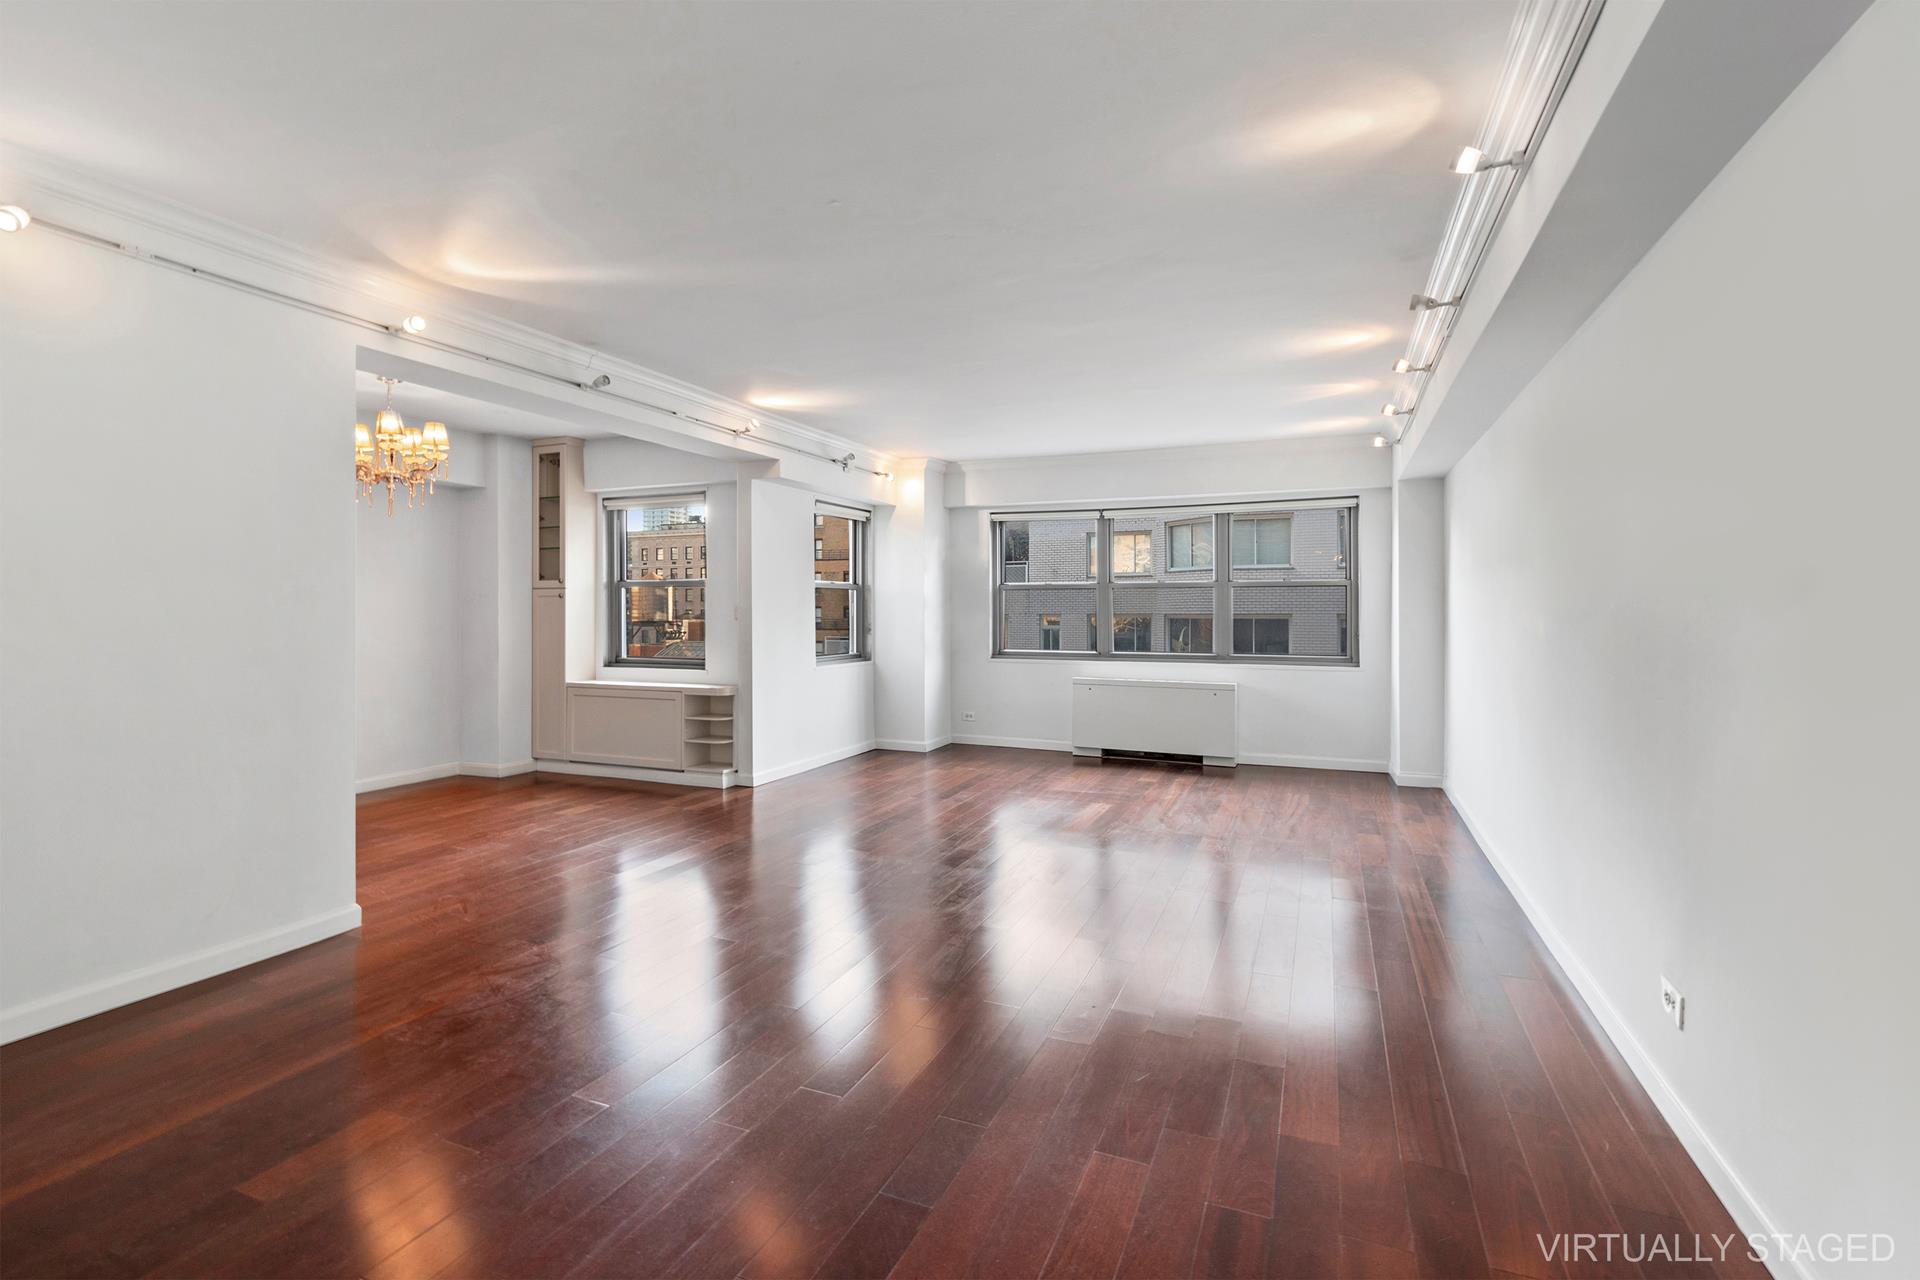 27 East 65th Street 14E, Lenox Hill, Upper East Side, NYC - 3 Bedrooms  
3 Bathrooms  
6 Rooms - 